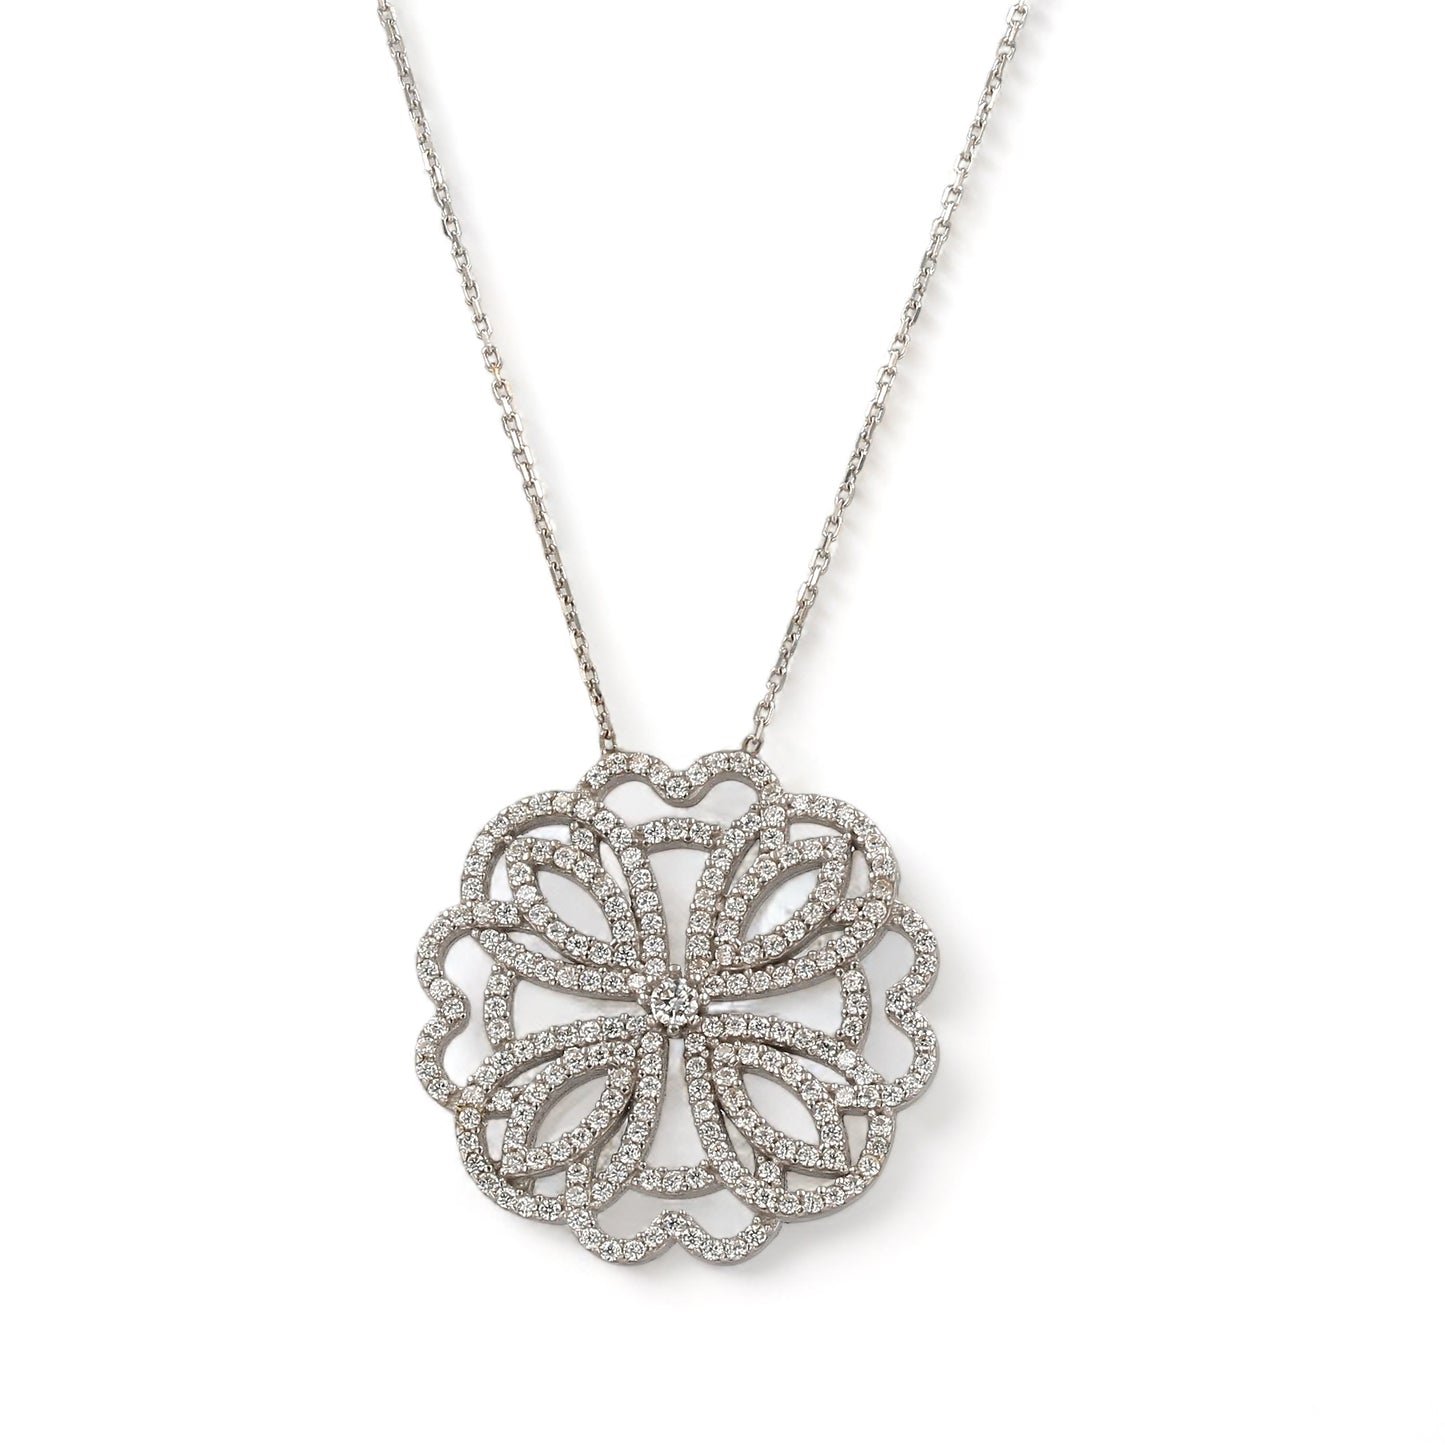 Sterling silver 925 rosette necklace-63833